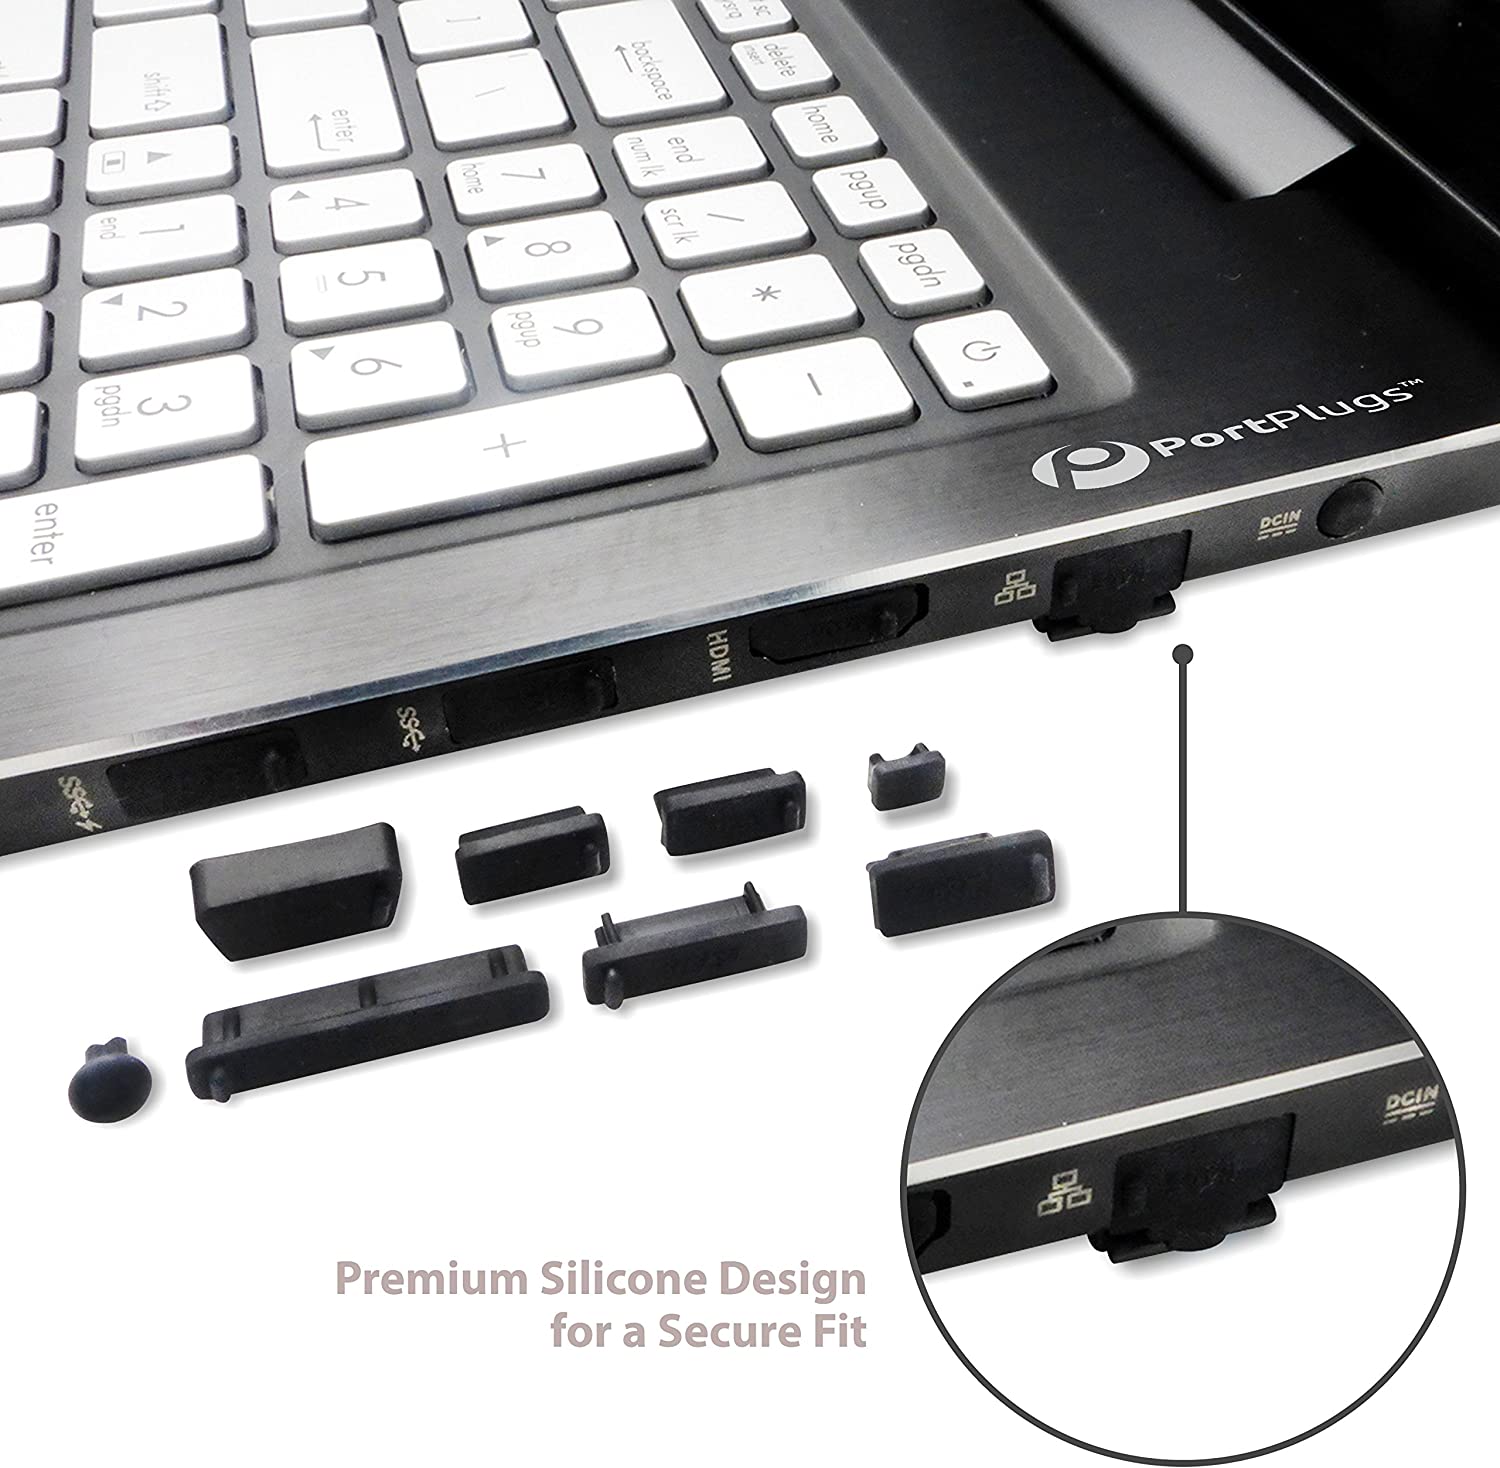 Port Plugs - Dust Plugs for PC Laptops (13 Piece Set) - Protect Computer Ports from Dirt, Dust, and Splashes (Black)